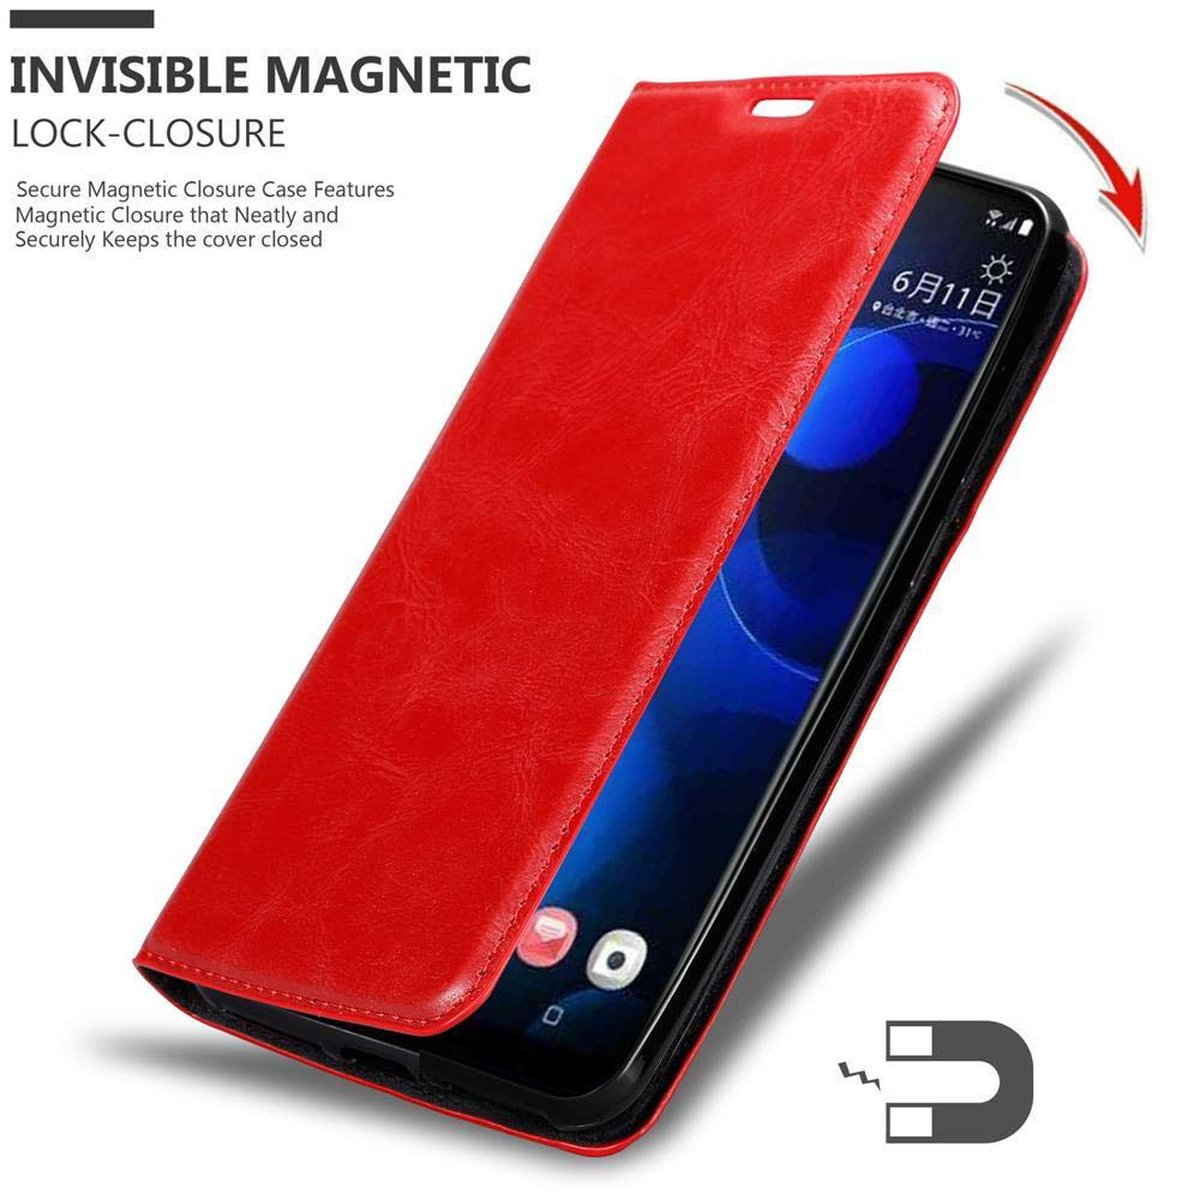 Magnet, 19 APFEL HTC, Book Invisible Bookcover, Hülle PLUS, ROT Desire CADORABO